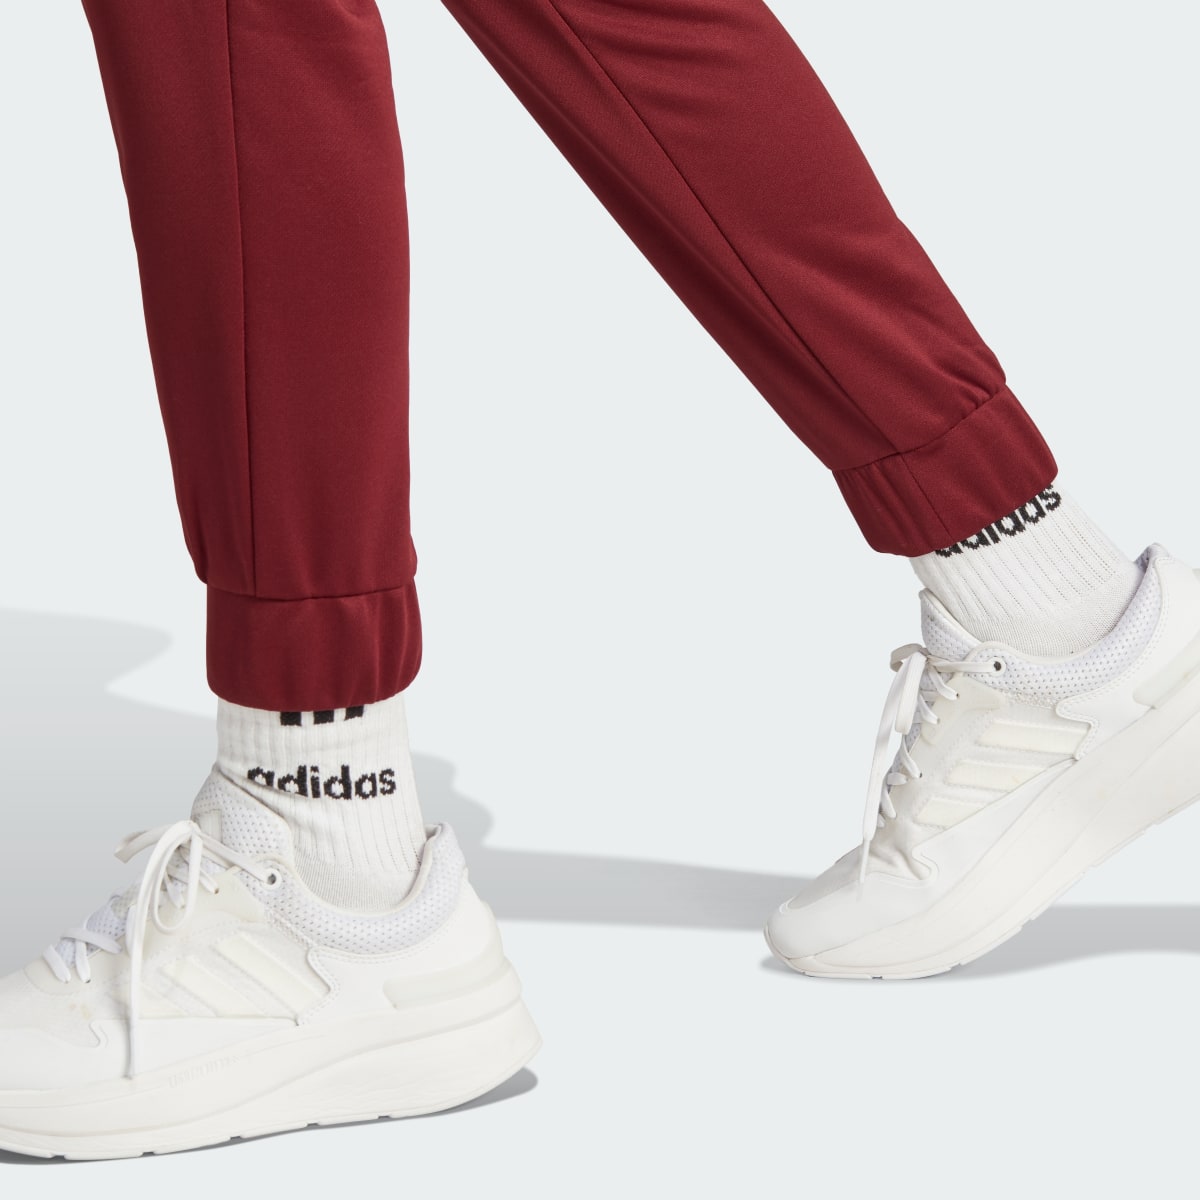 Adidas Track suit Linear. 9